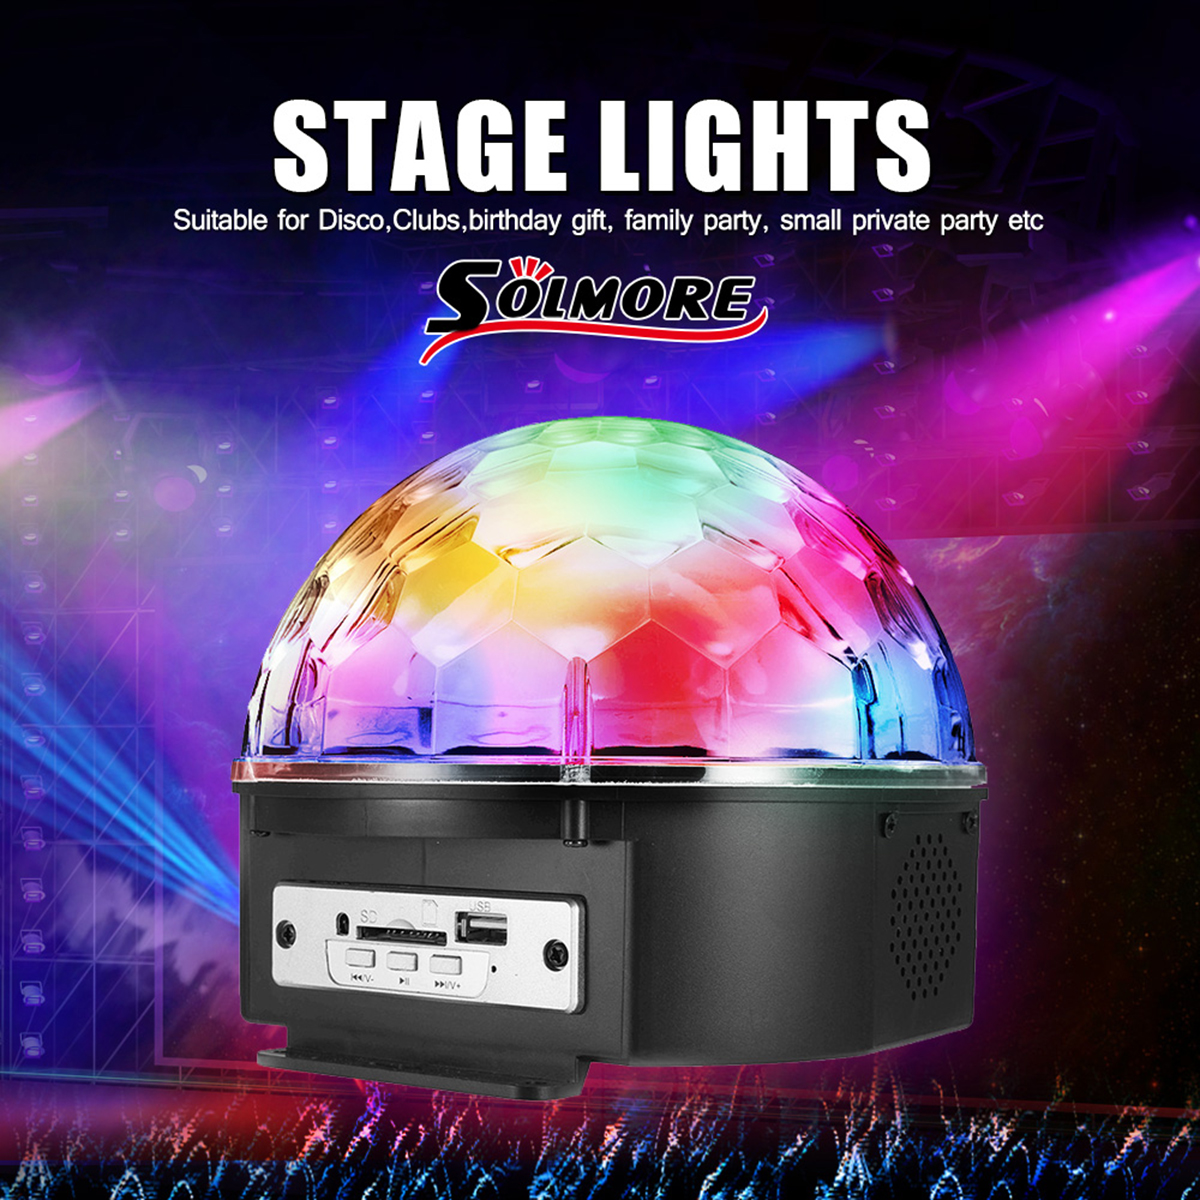 9-Color-LED-Voice-Control-With-Remote-Control-MP3-Crystal-Ball-Flashlightts-Stage-Sprinkle-Lights-1141986-2